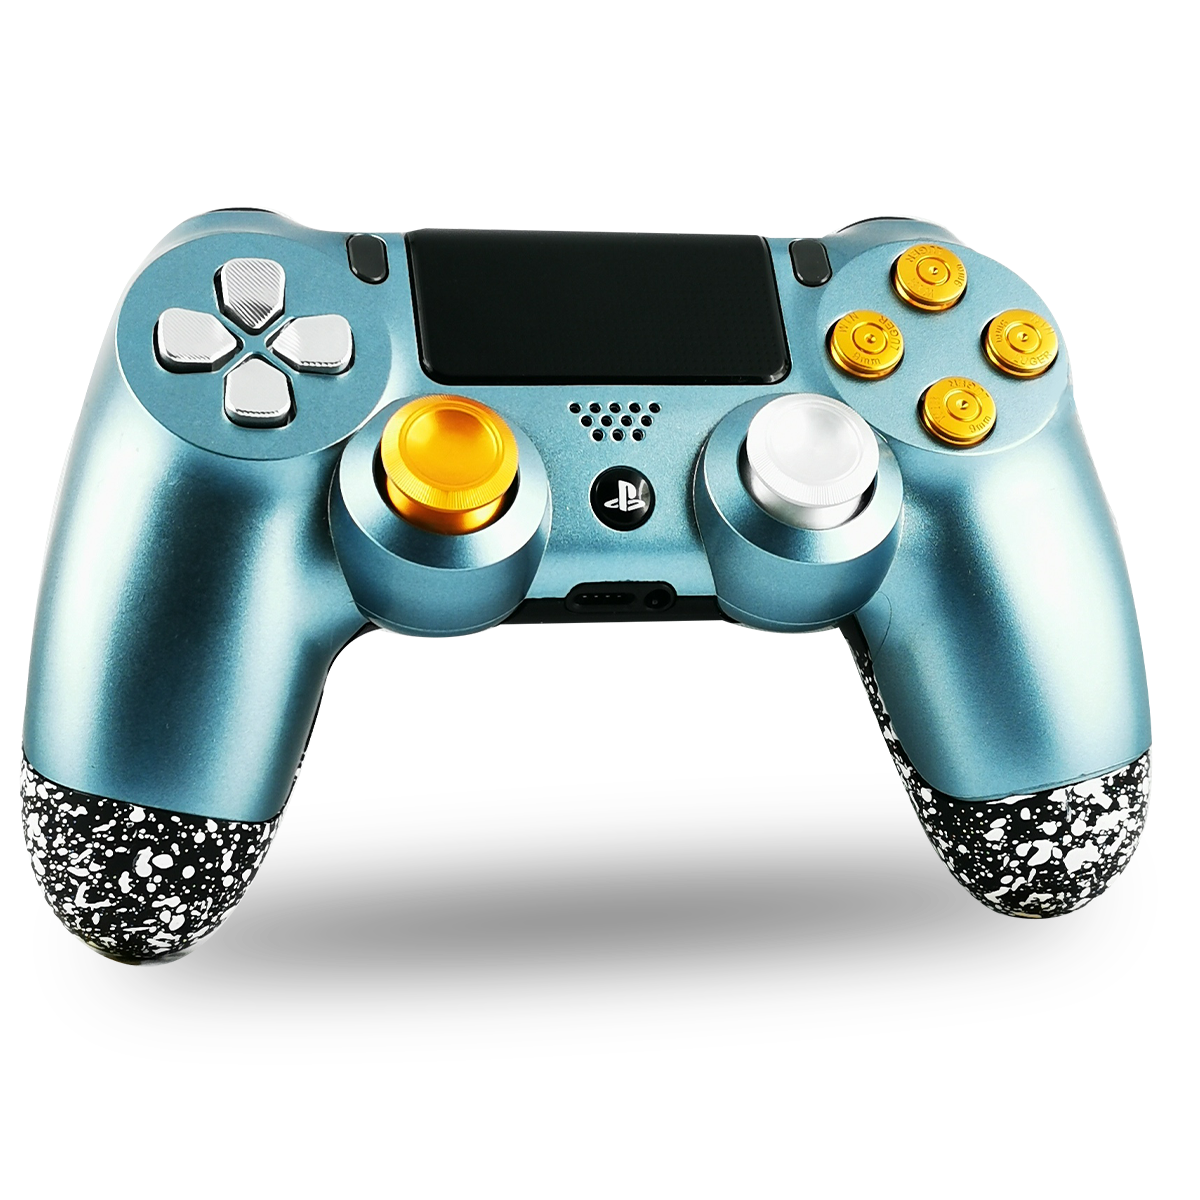 manette-PS4-custom-playstation-4-sony-personnalisee-drawmypad-philadelphie